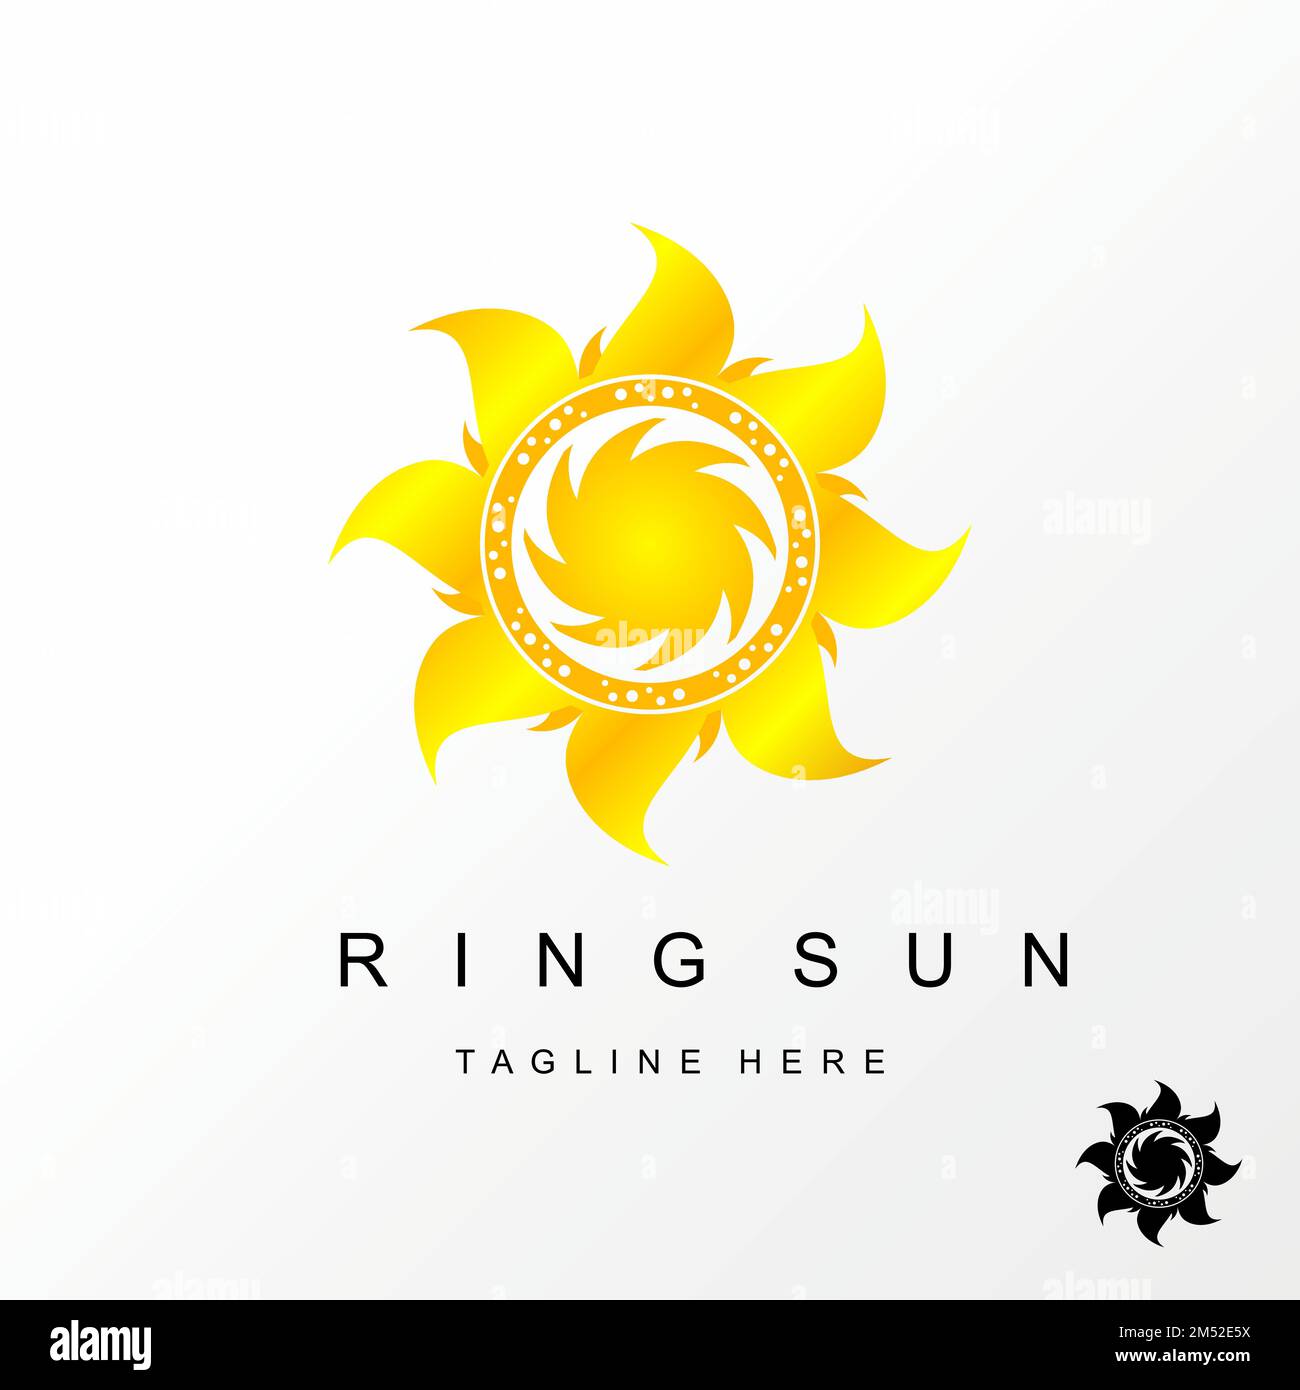 Unique sunlight or heating circle image graphic icon logo design abstract concept vector stock. Can be used as a symbol of bright and strength Stock Vector